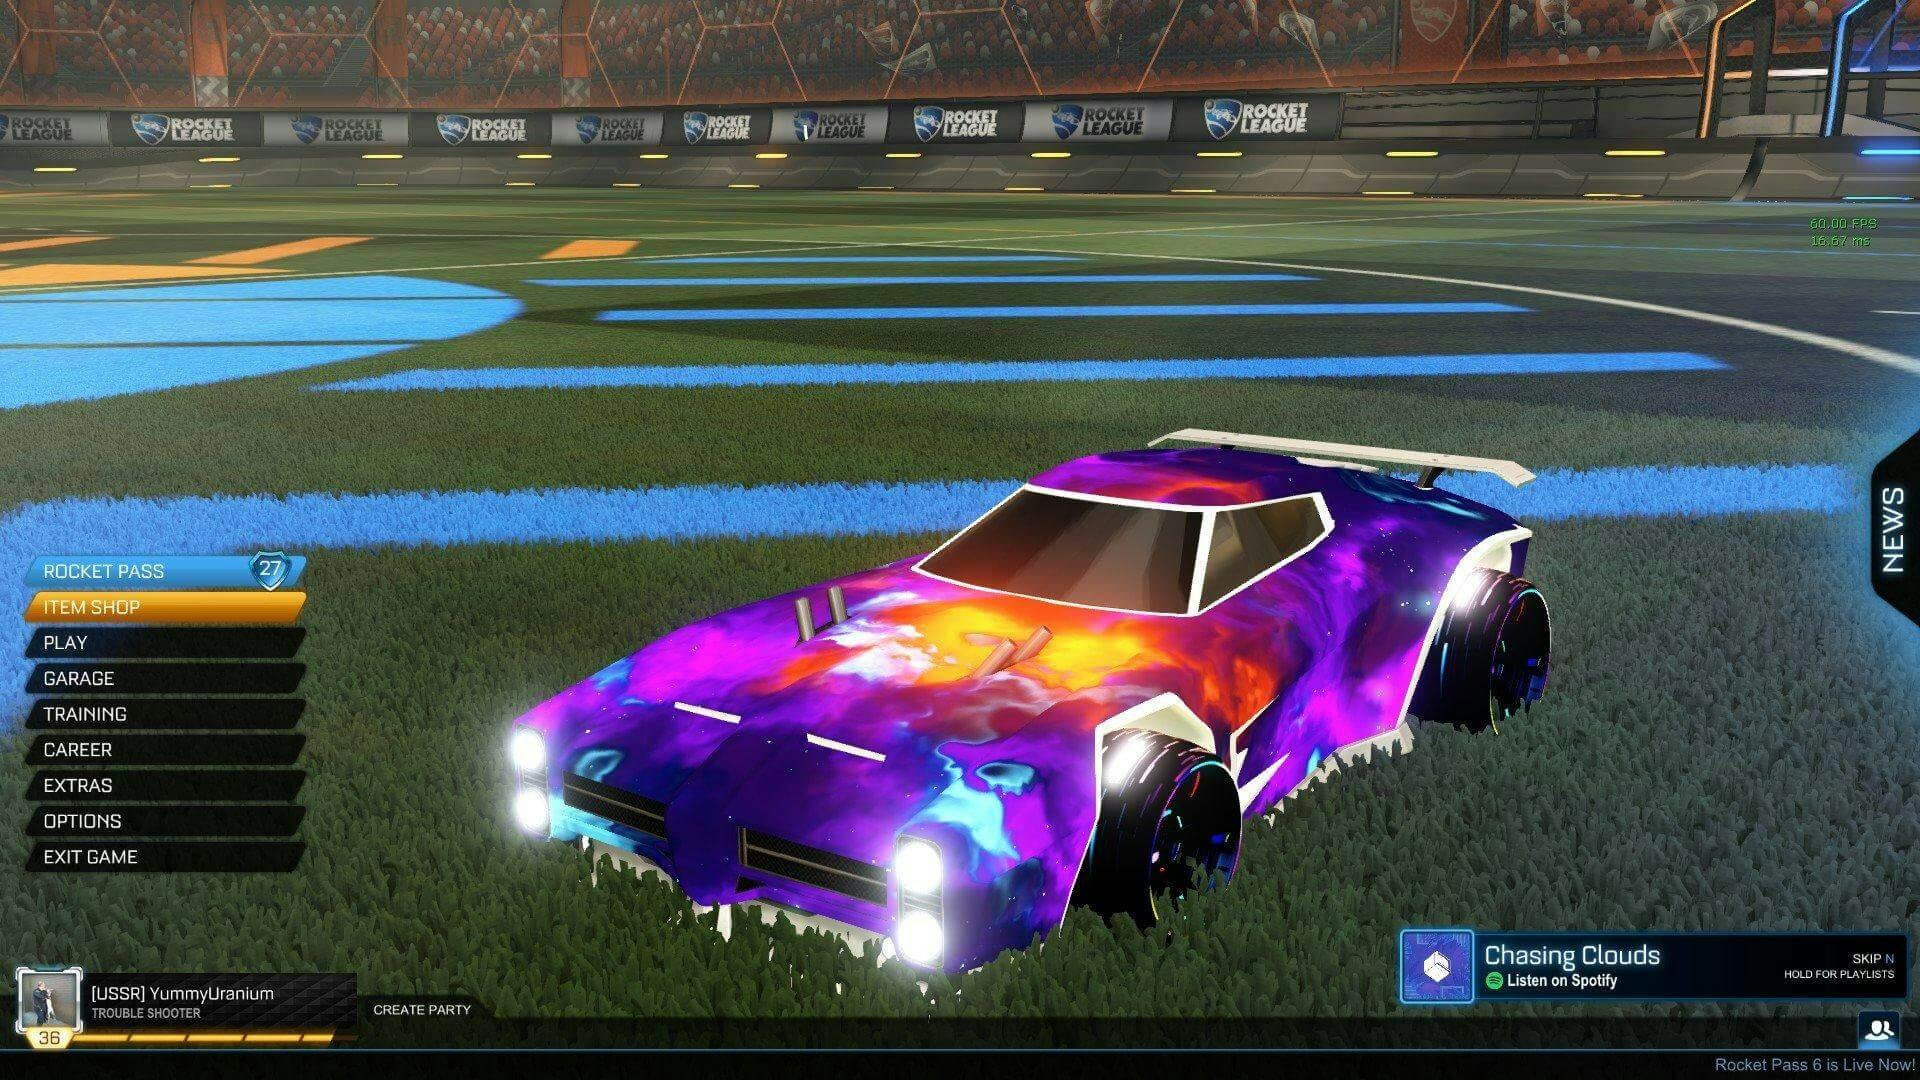 Rocket League Design With Dominus and Interstellar